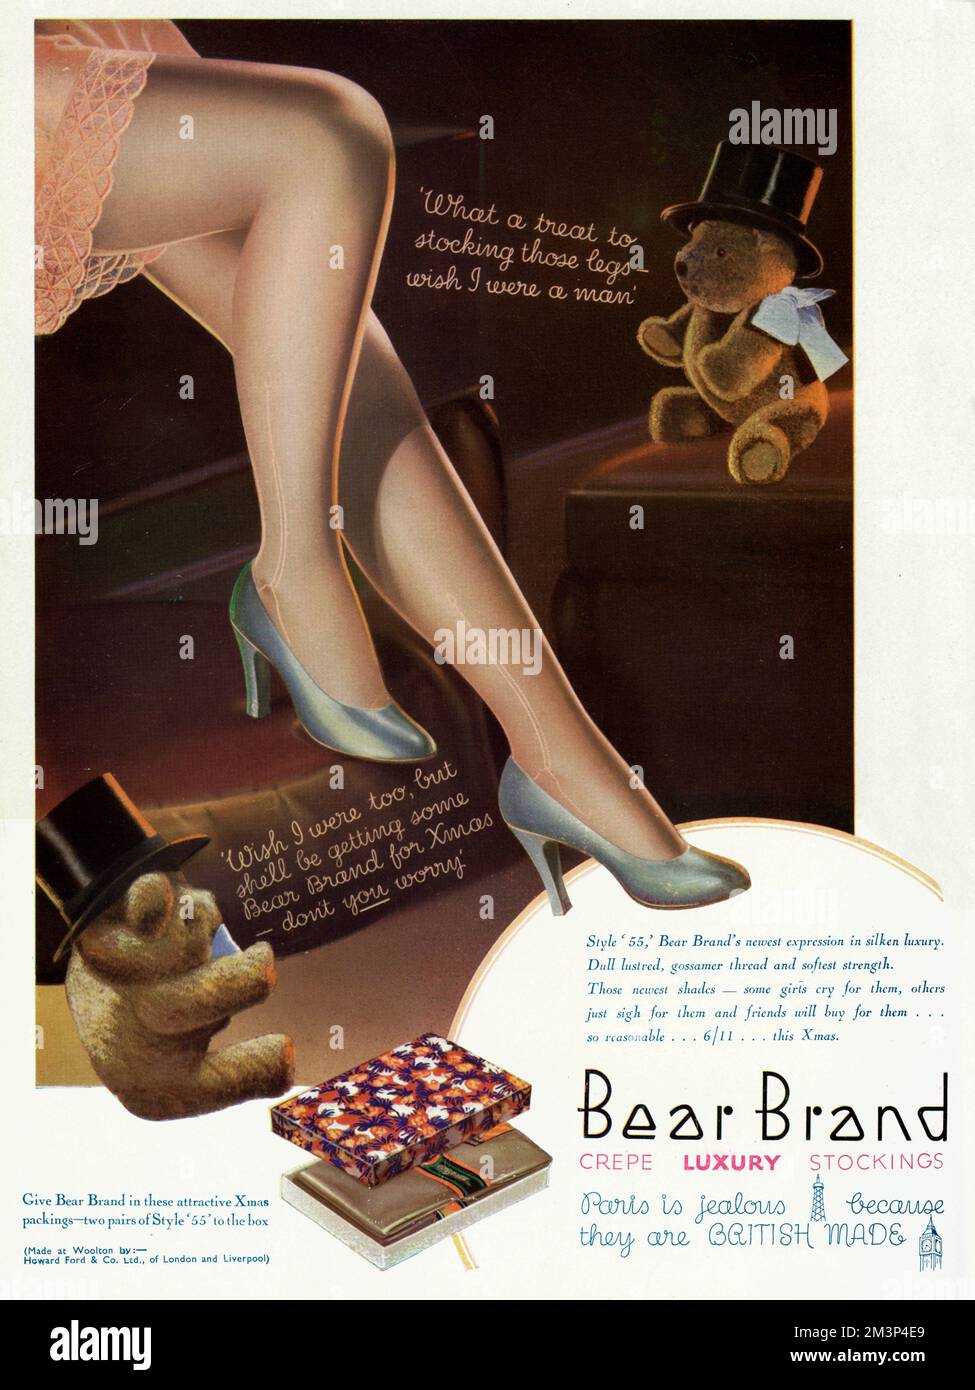 Bear Brand's newest expression in silken luxury.  Dull lustred, gossamer thread and softest strength.  1933 Stock Photo